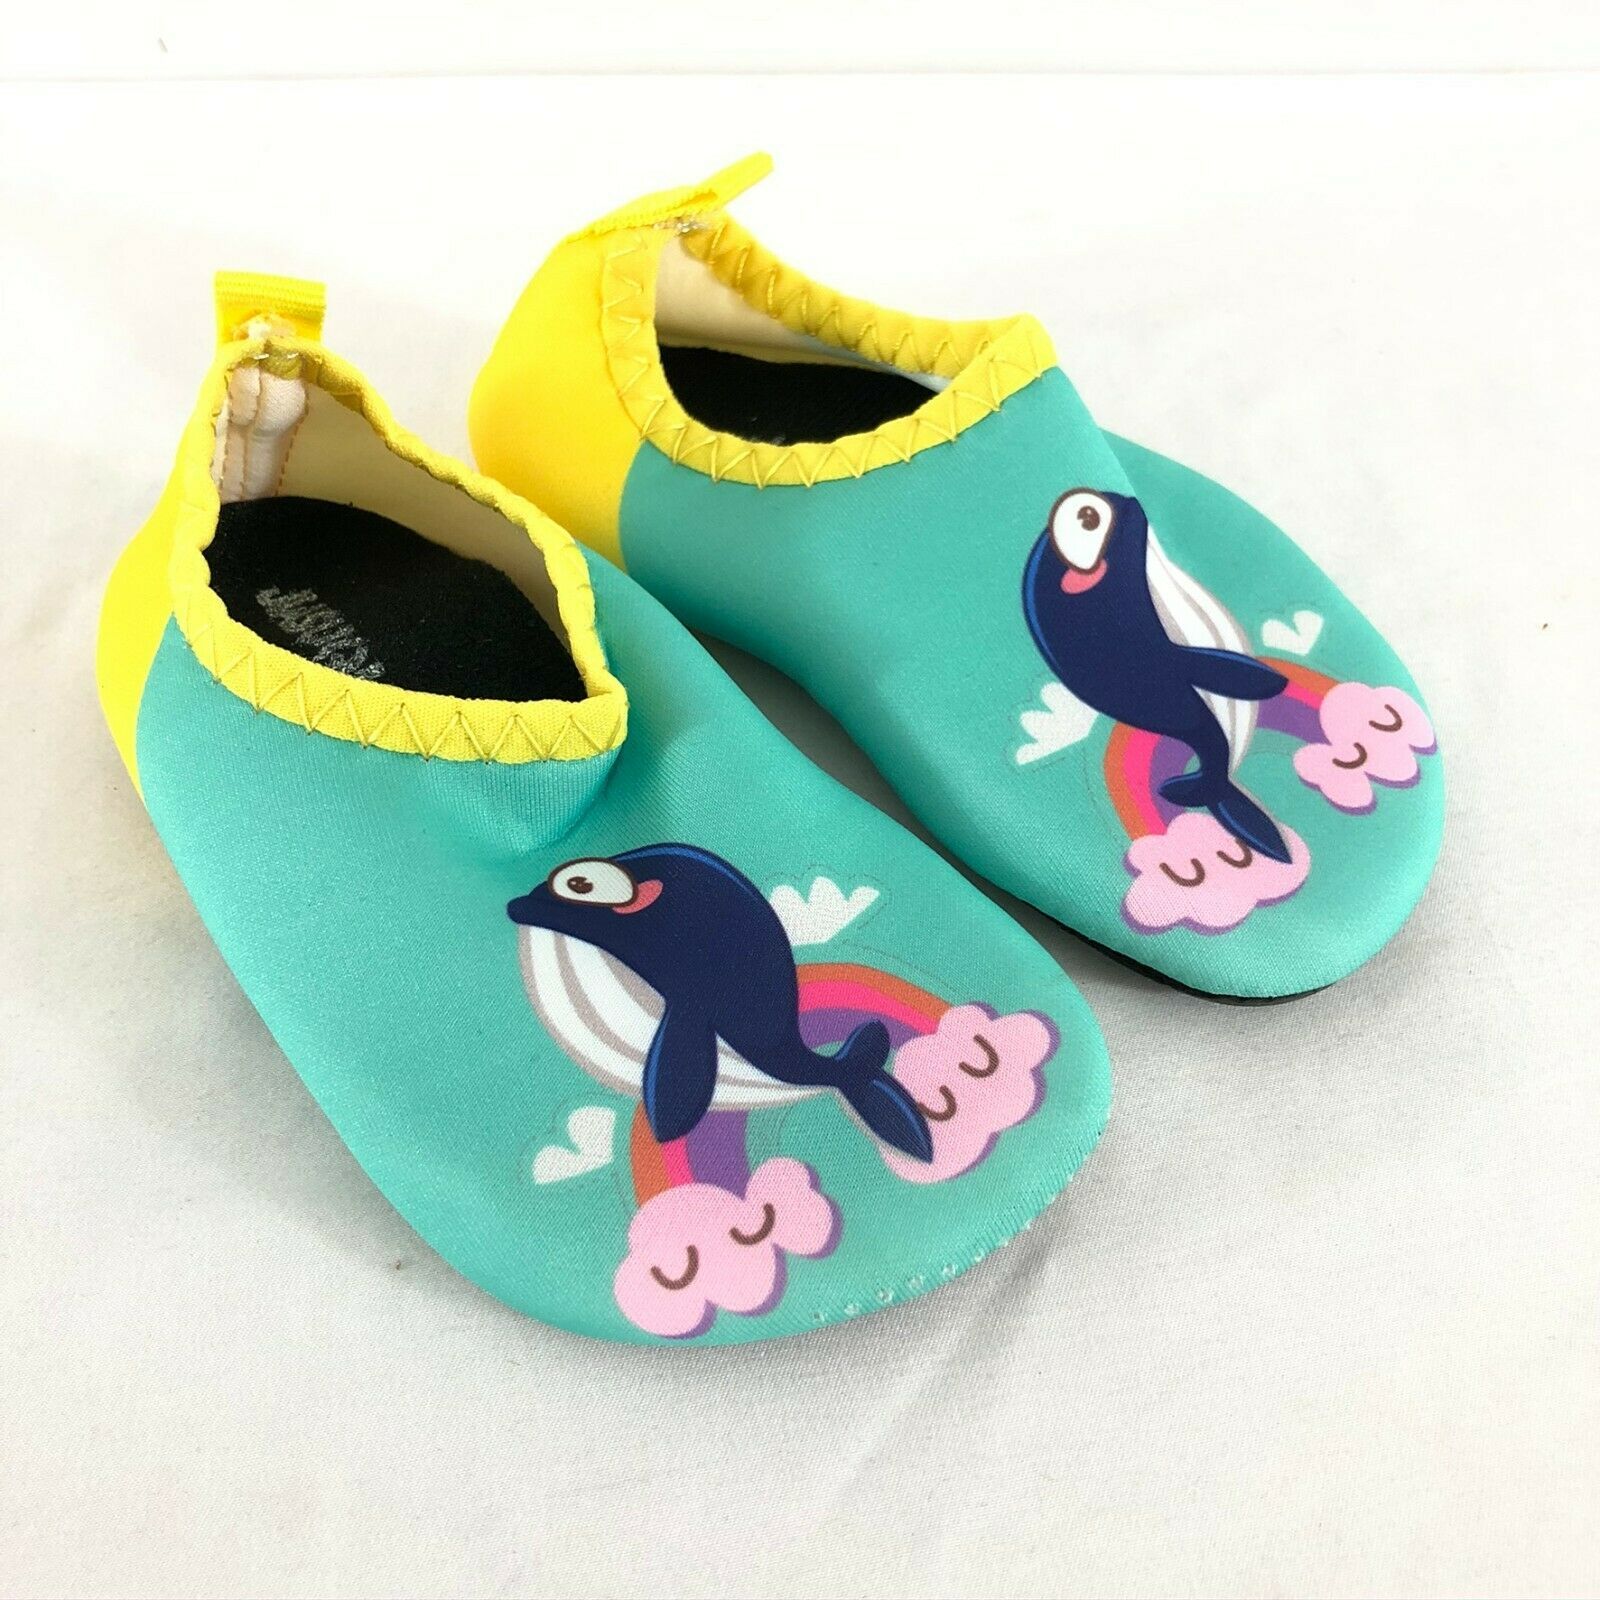 Primary image for Toddler Girl Water Shoes Slip On Fabric Lightweight Dolphin Green 21/22 US 5-6